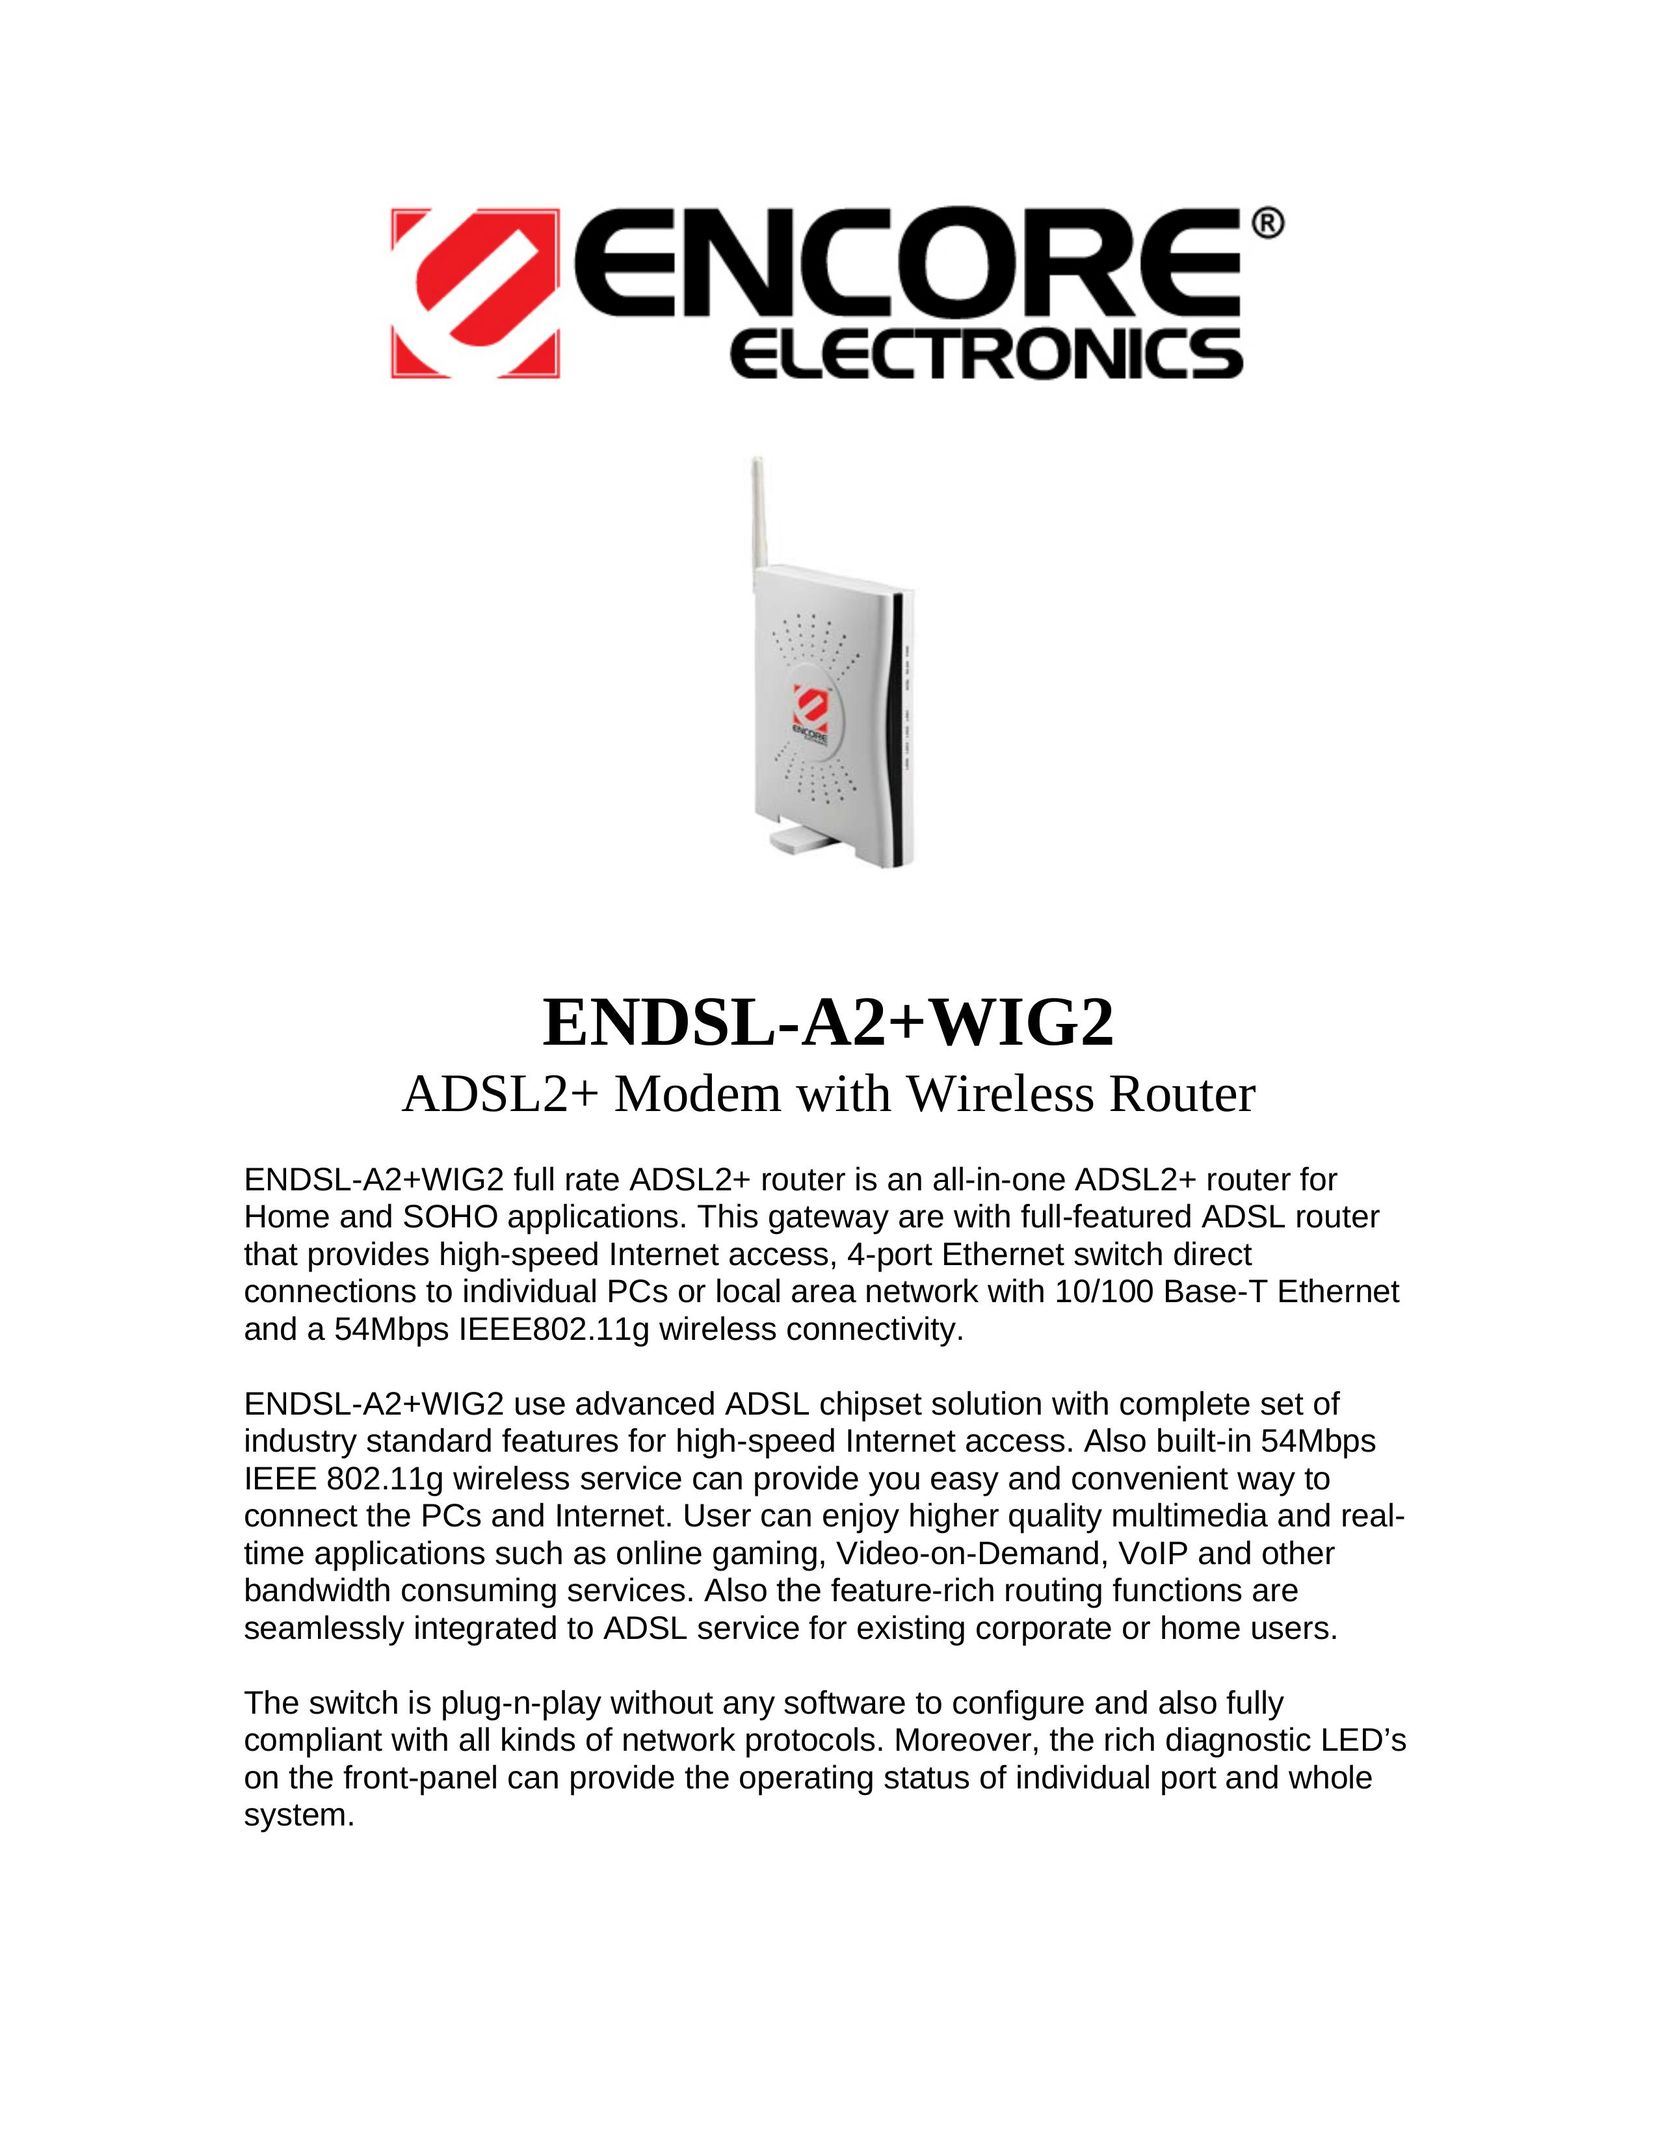 Encore electronic ENDSL-A2+WIG2 Network Router User Manual